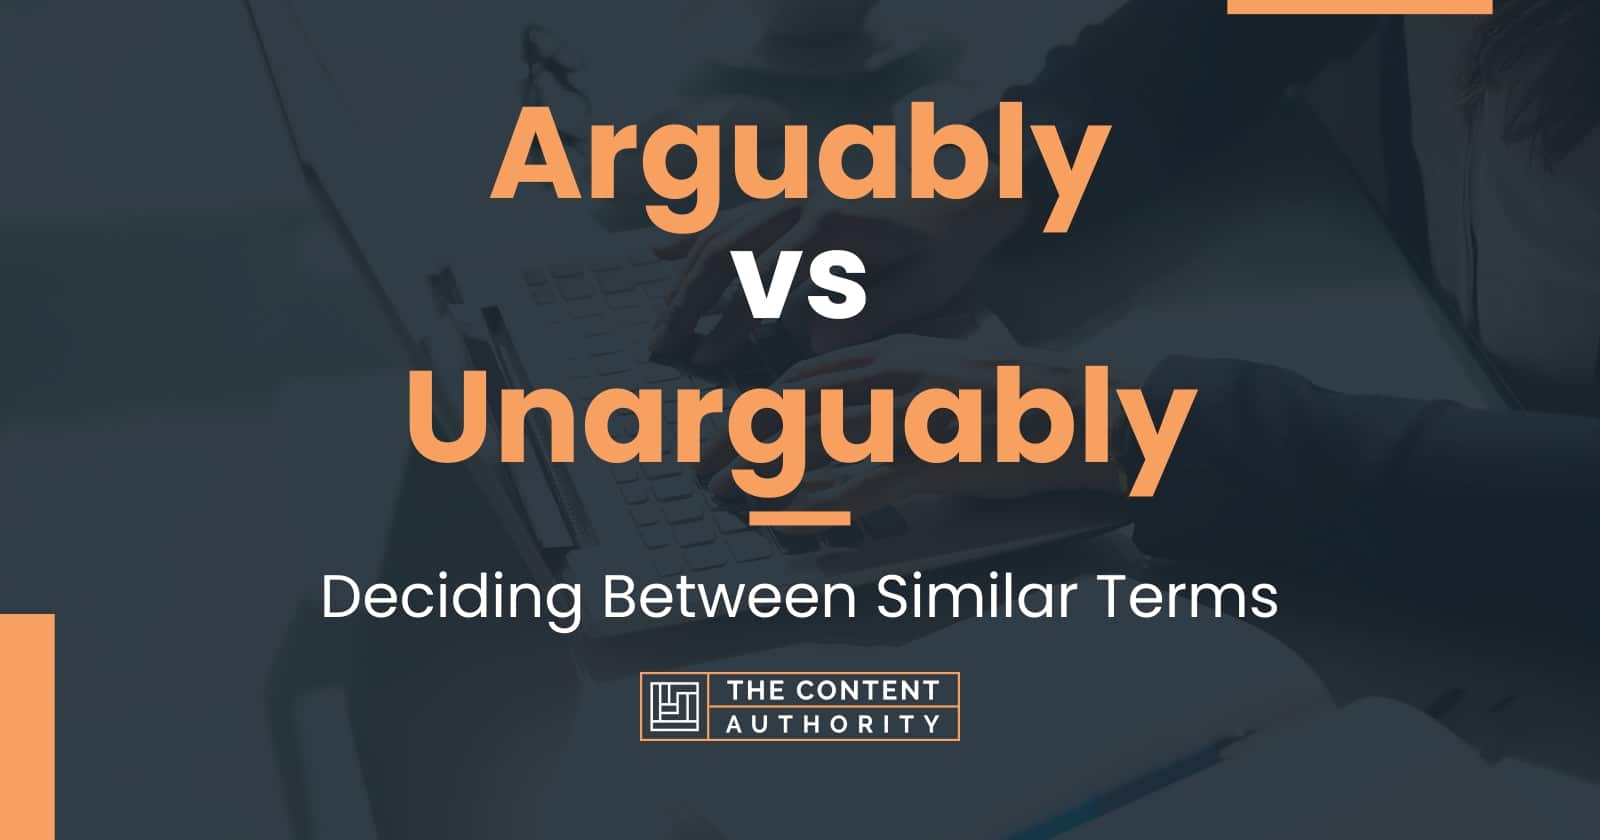 Arguably vs Unarguably: Deciding Between Similar Terms